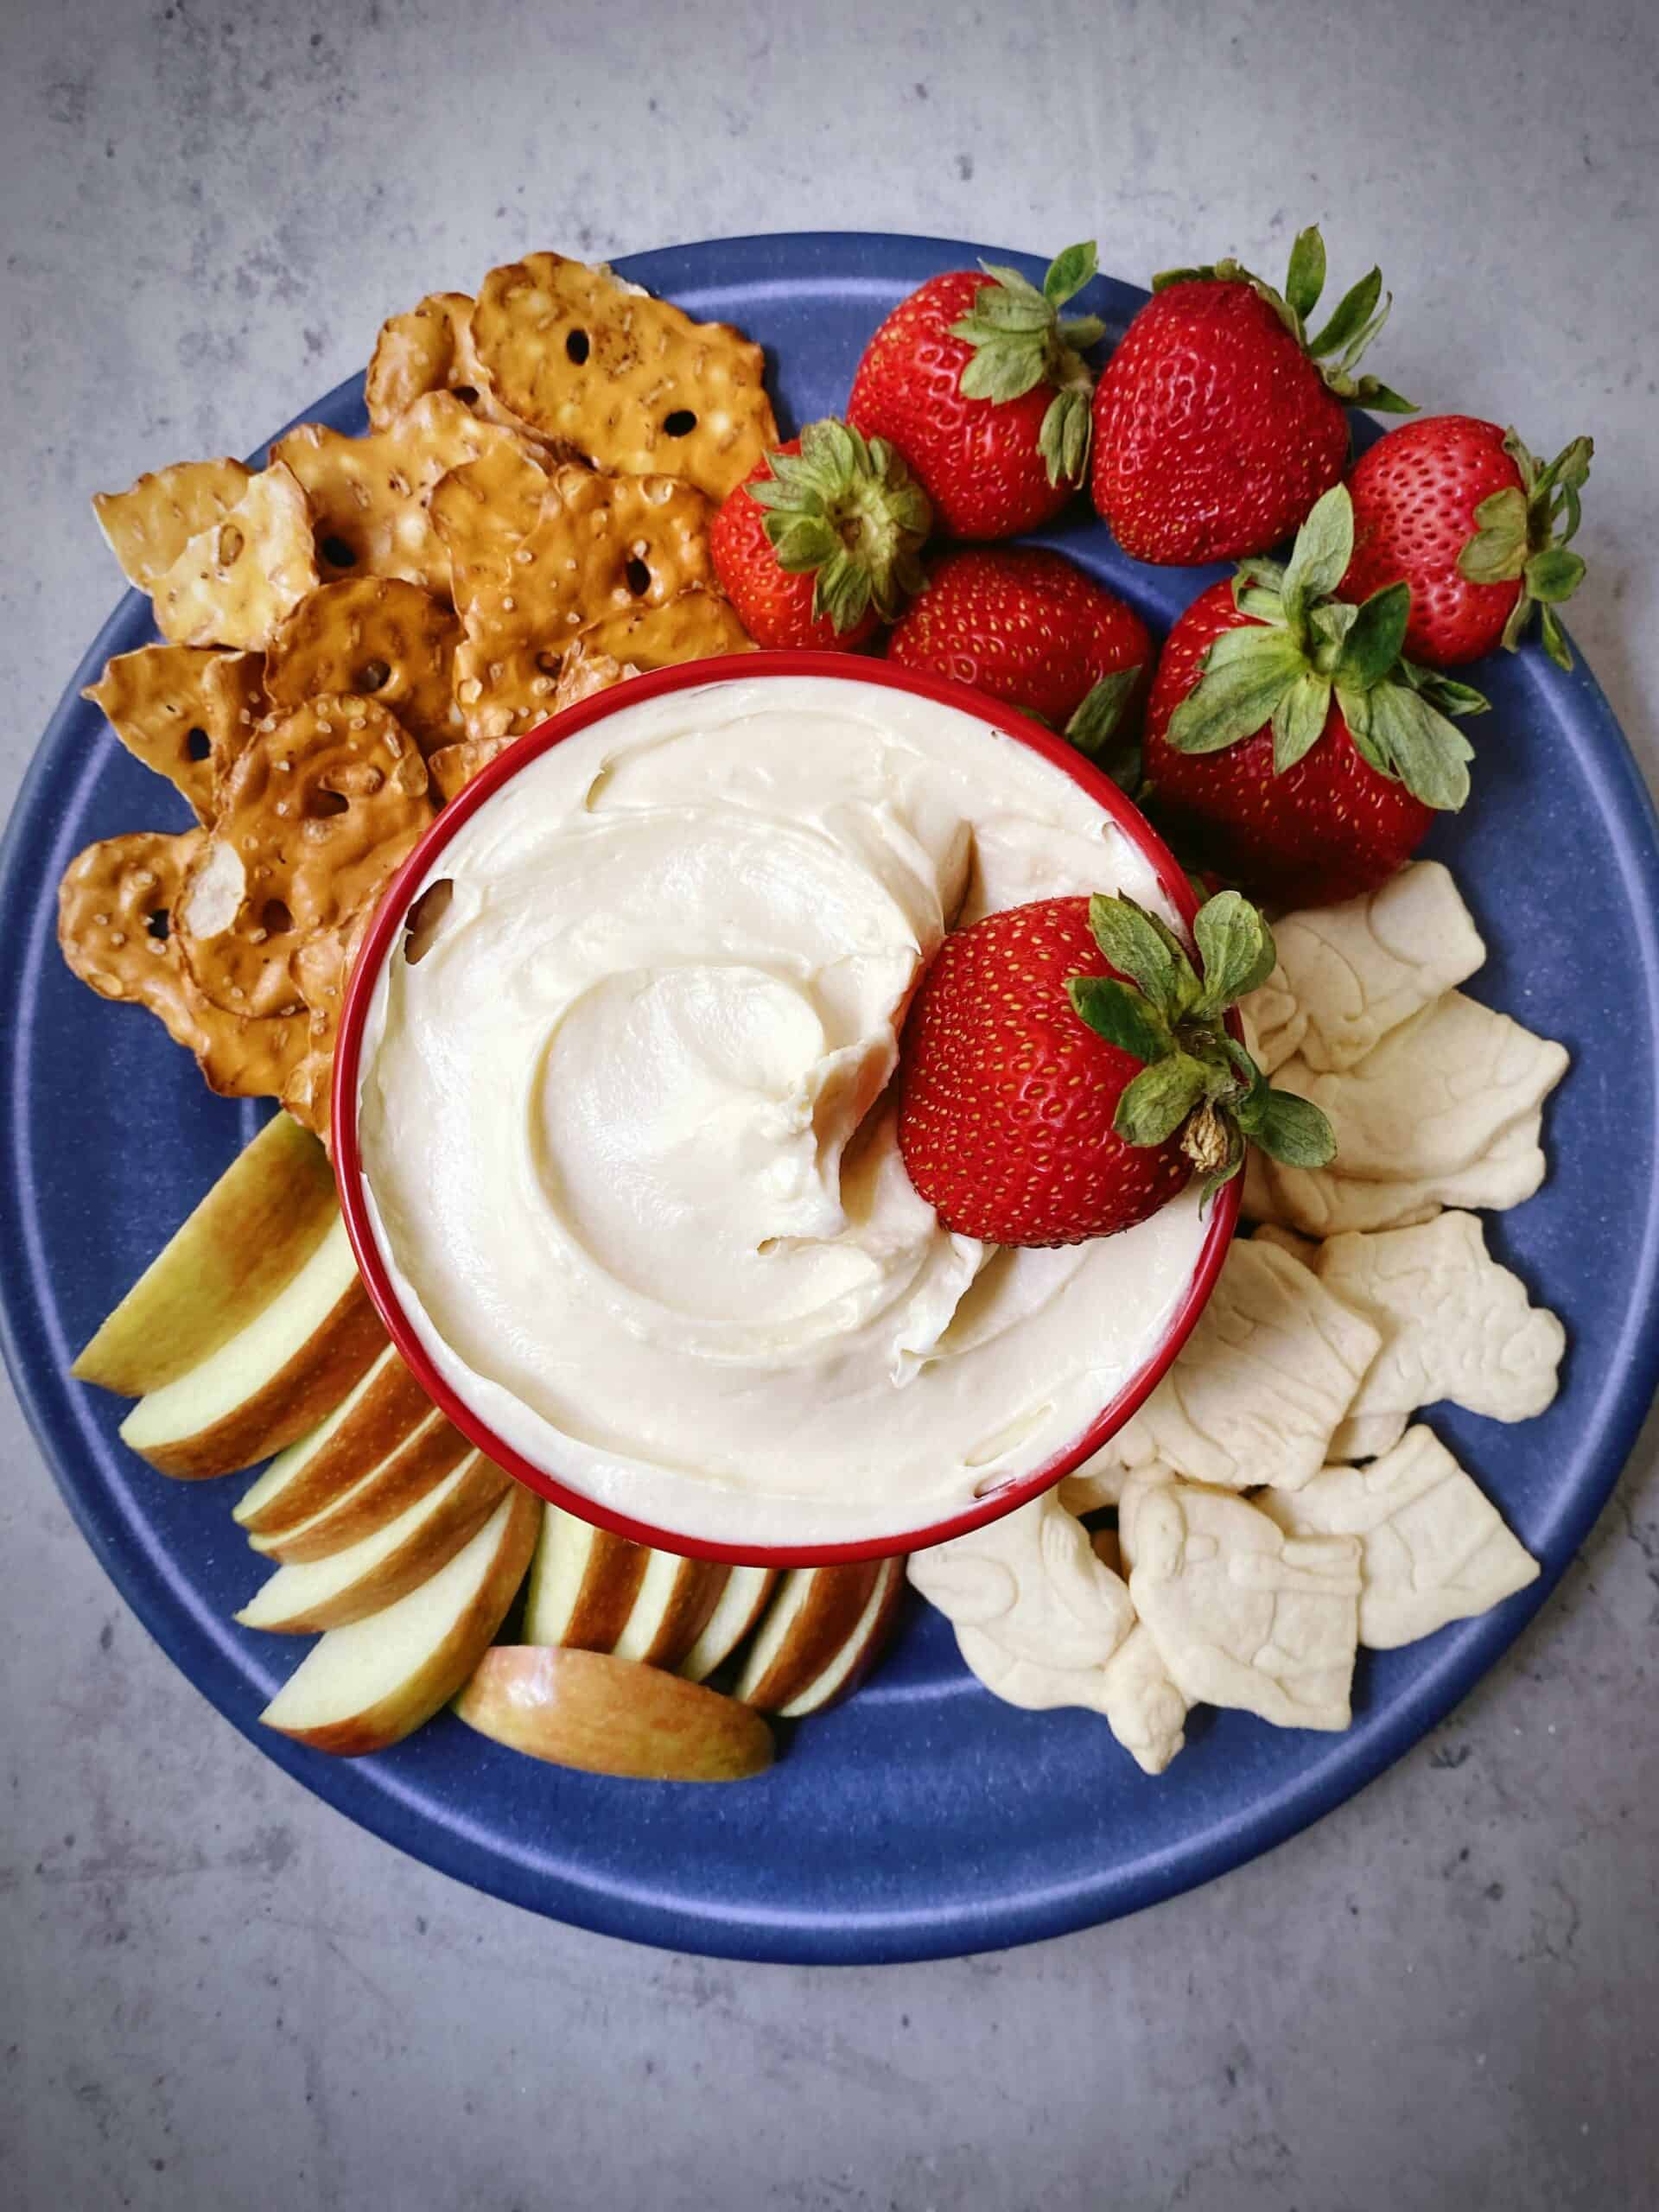 Easy Cream Cheese Fruit Dip | Confessions of a Grocery Addict